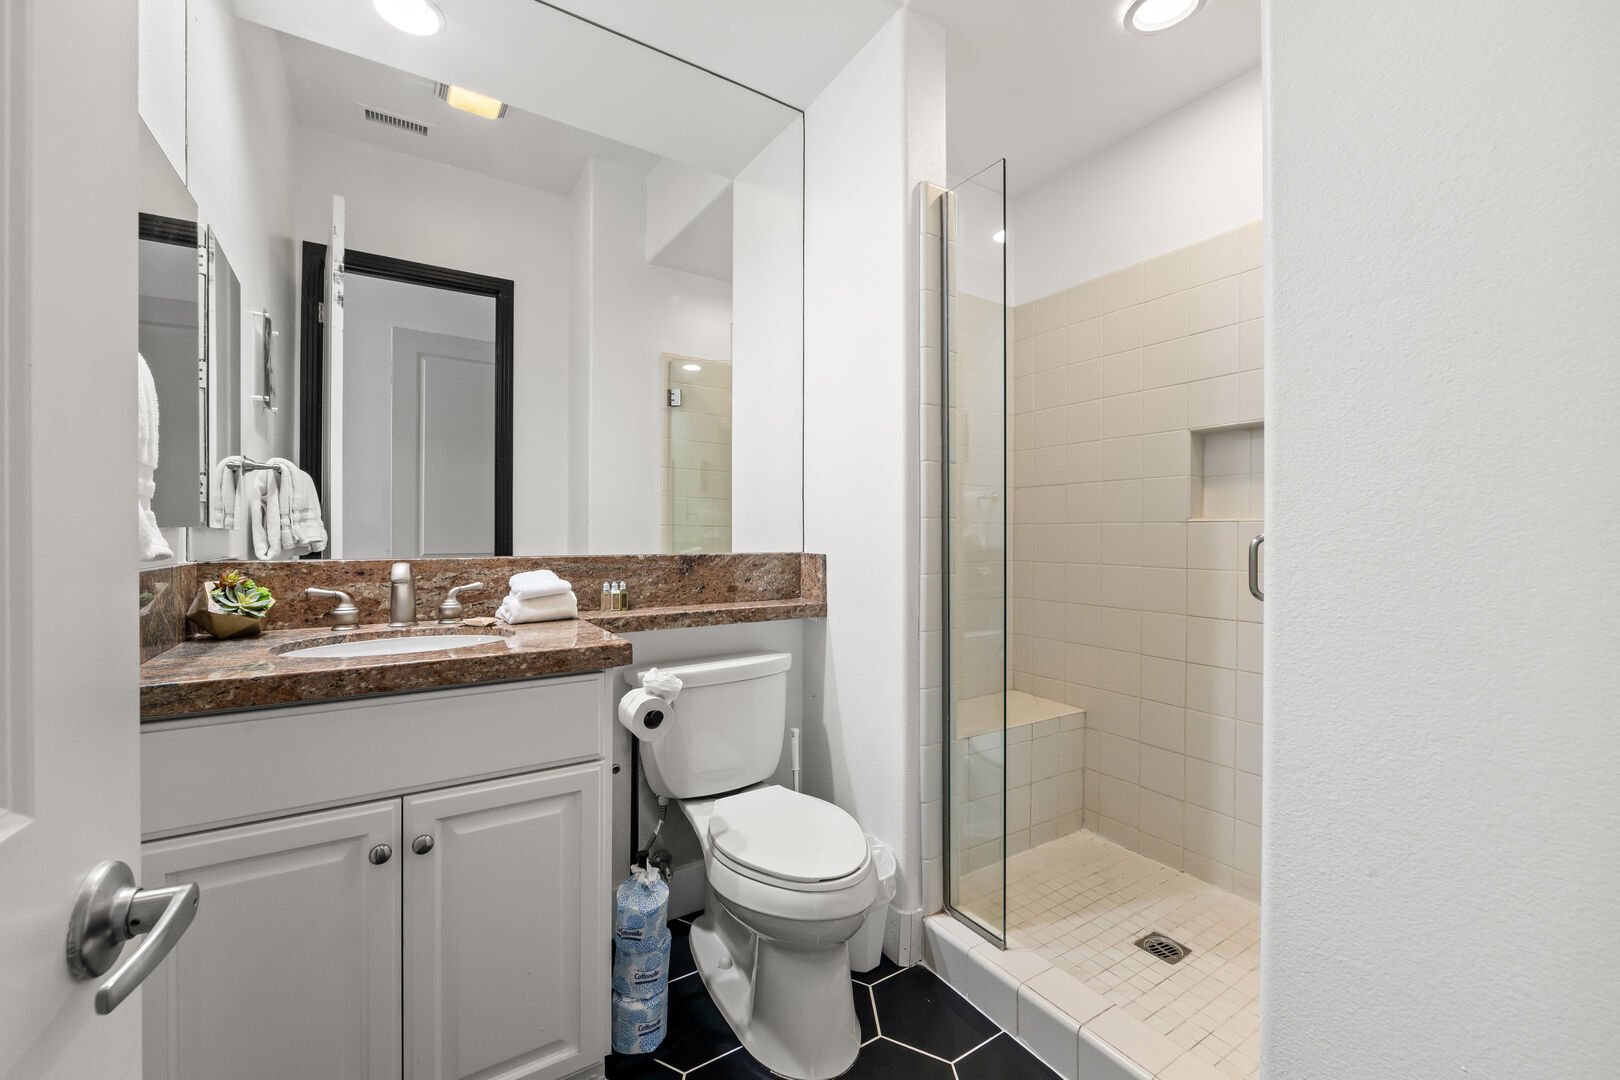 The hallway bathroom features a tile shower and granite countertop.